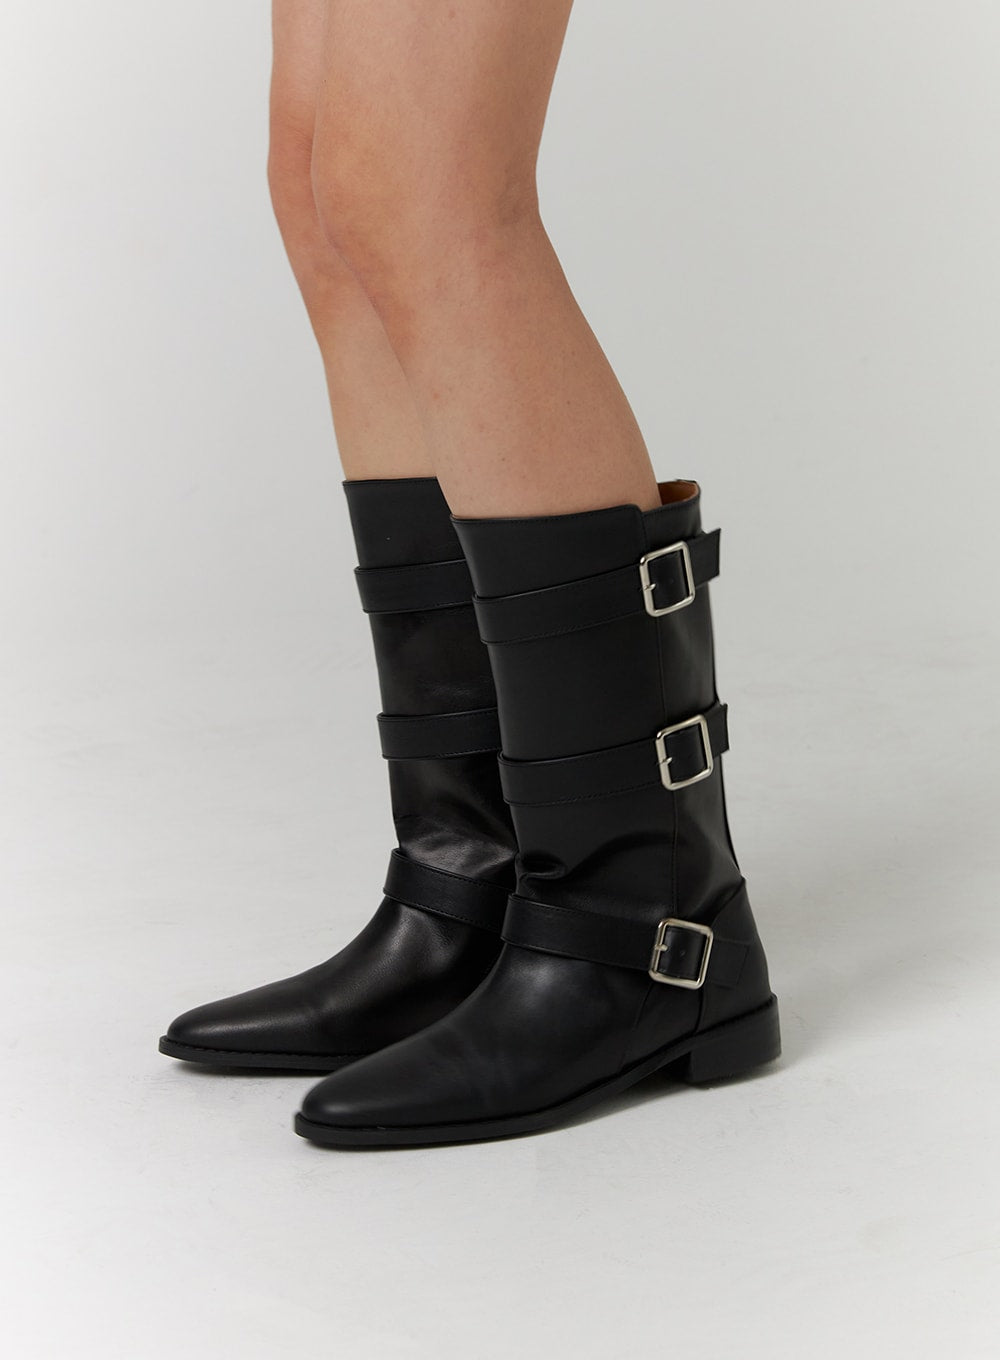 faux-leather-belted-boots-cd312